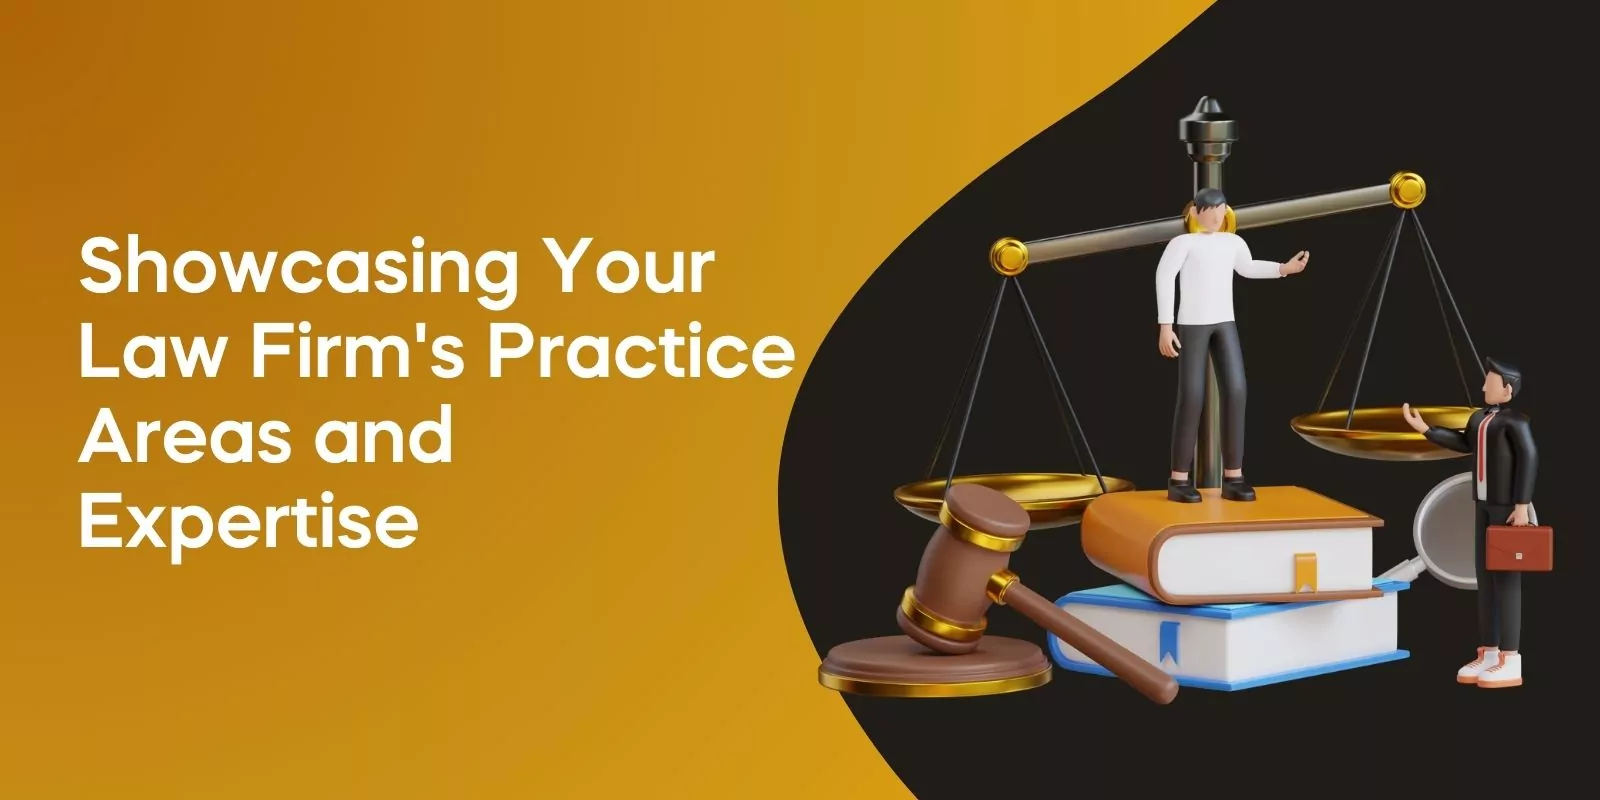 Showcasing Your Law Firm's Practice Areas and Expertise